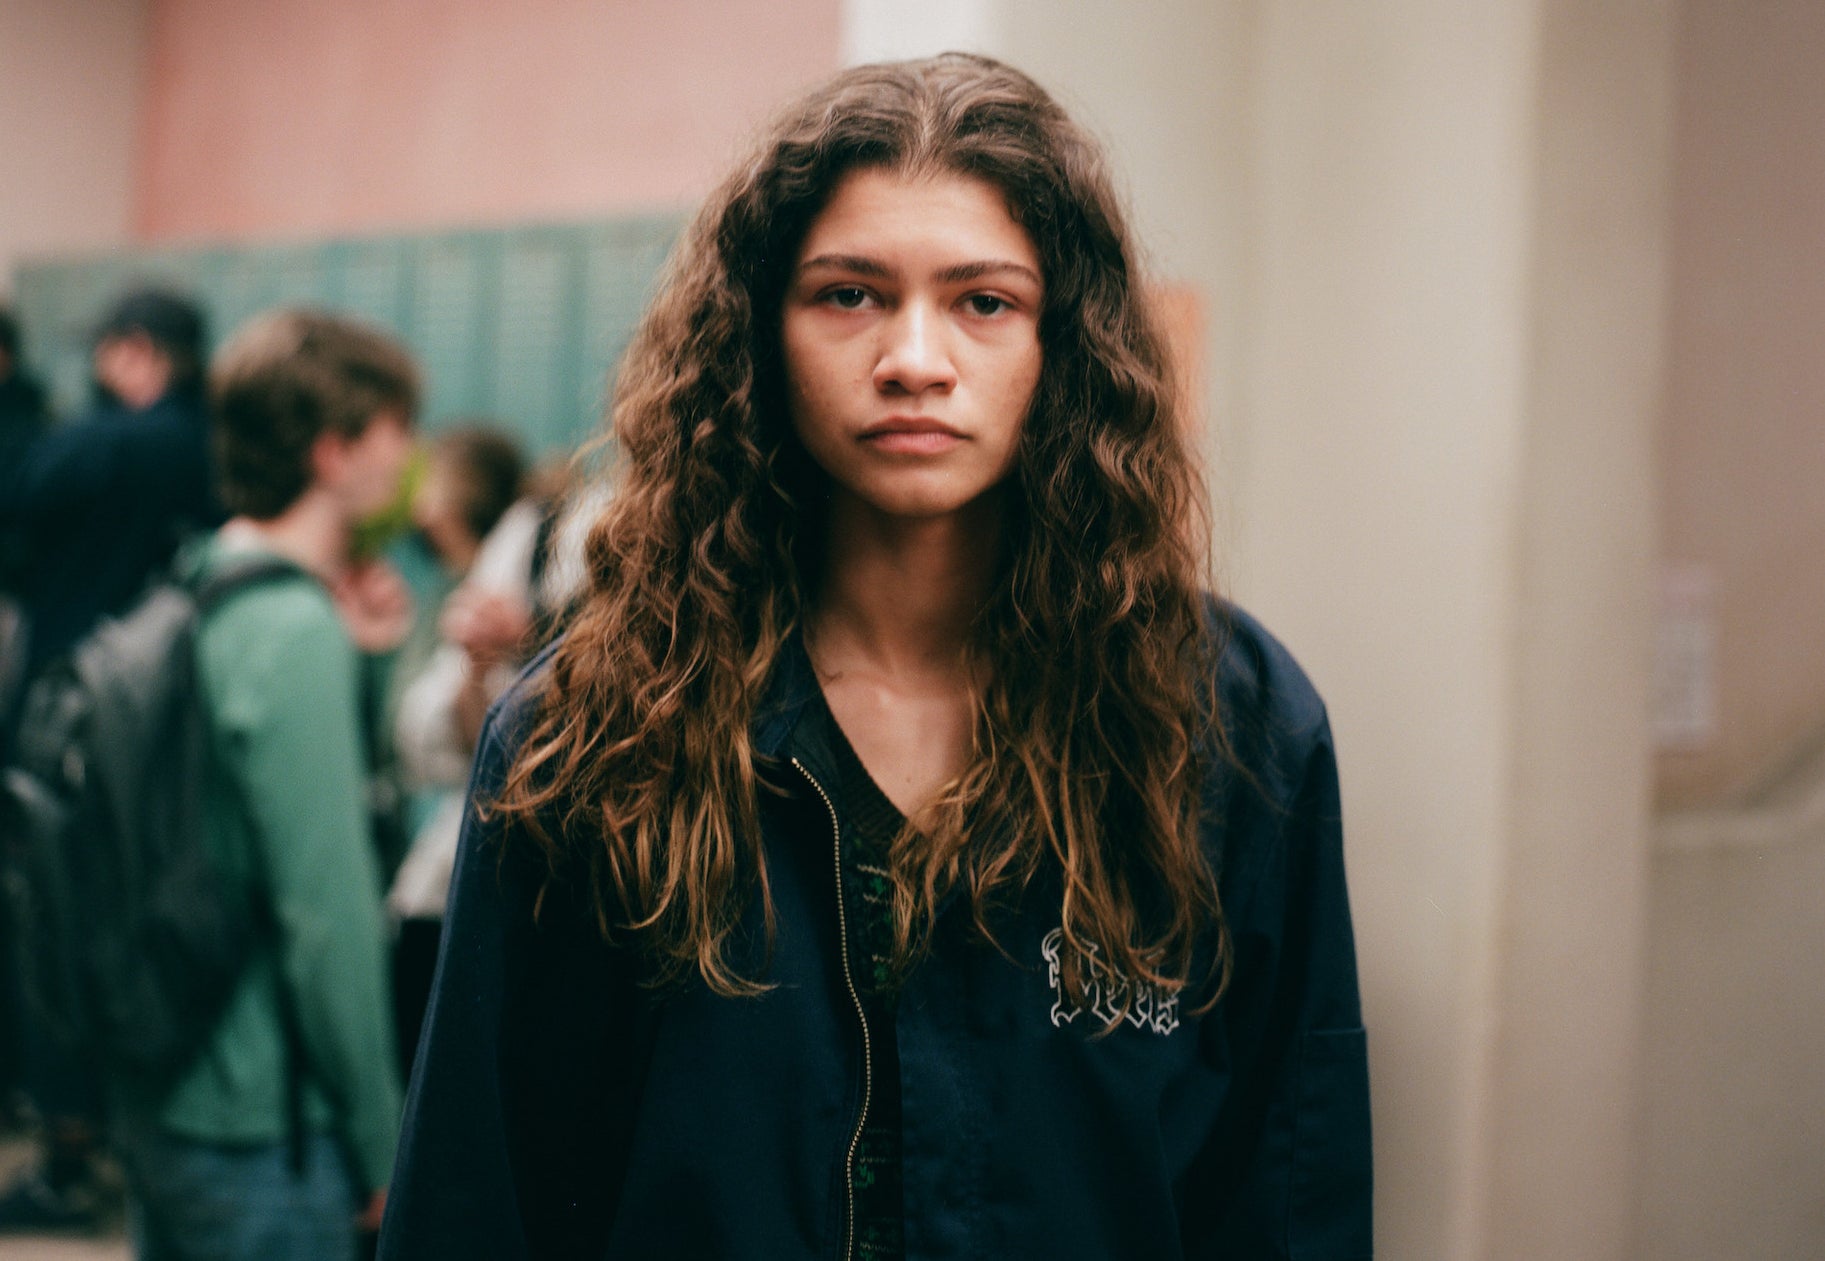 A teen girl with long wavy brown hair stands in a school hallway